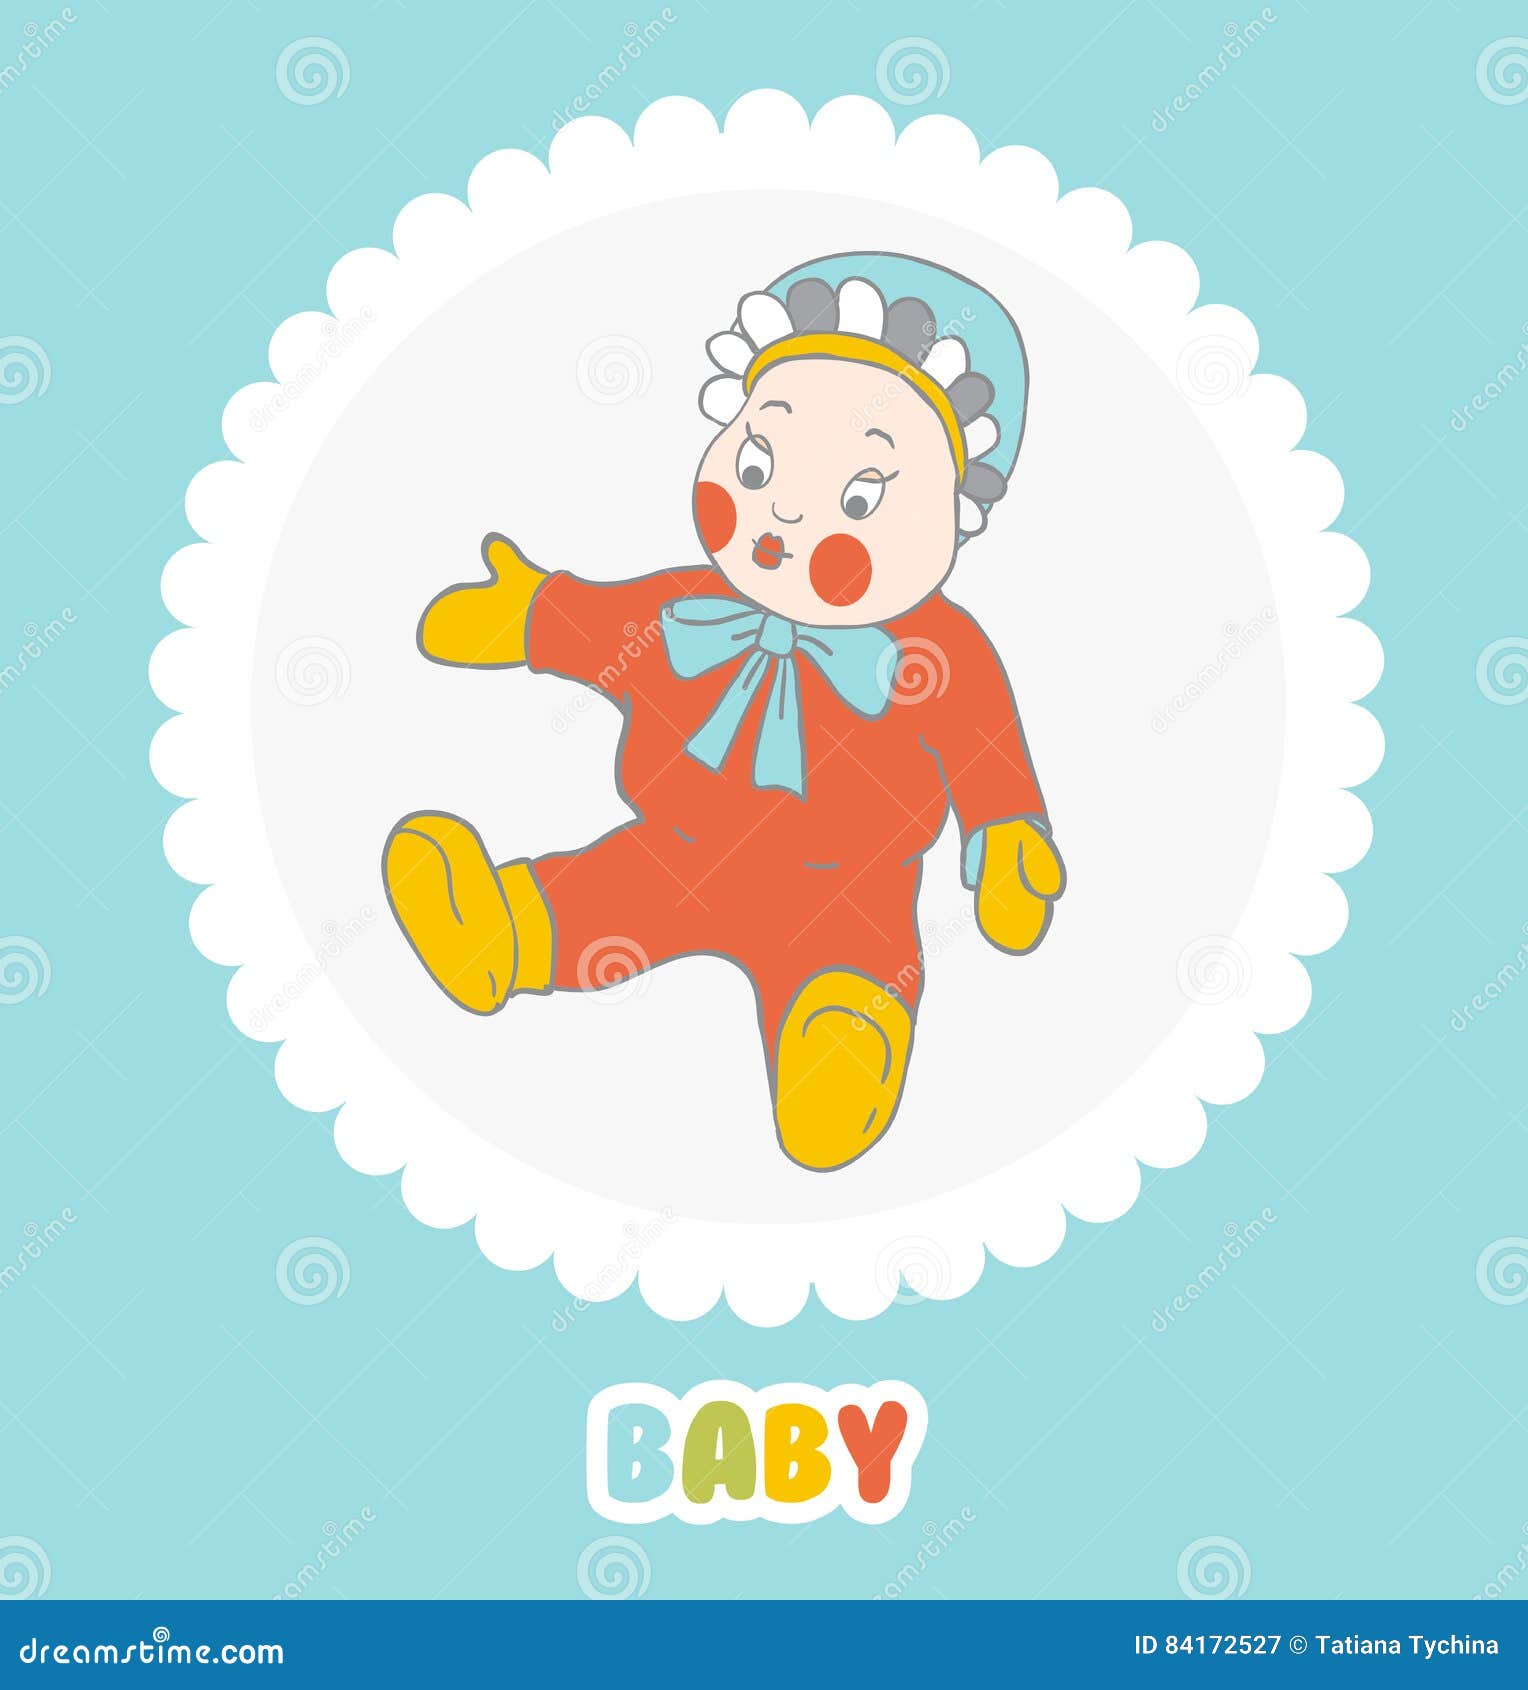 Baby Doll in a Cap with Ruffles on Light Background Stock Vector -  Illustration of card, ruffles: 84172527